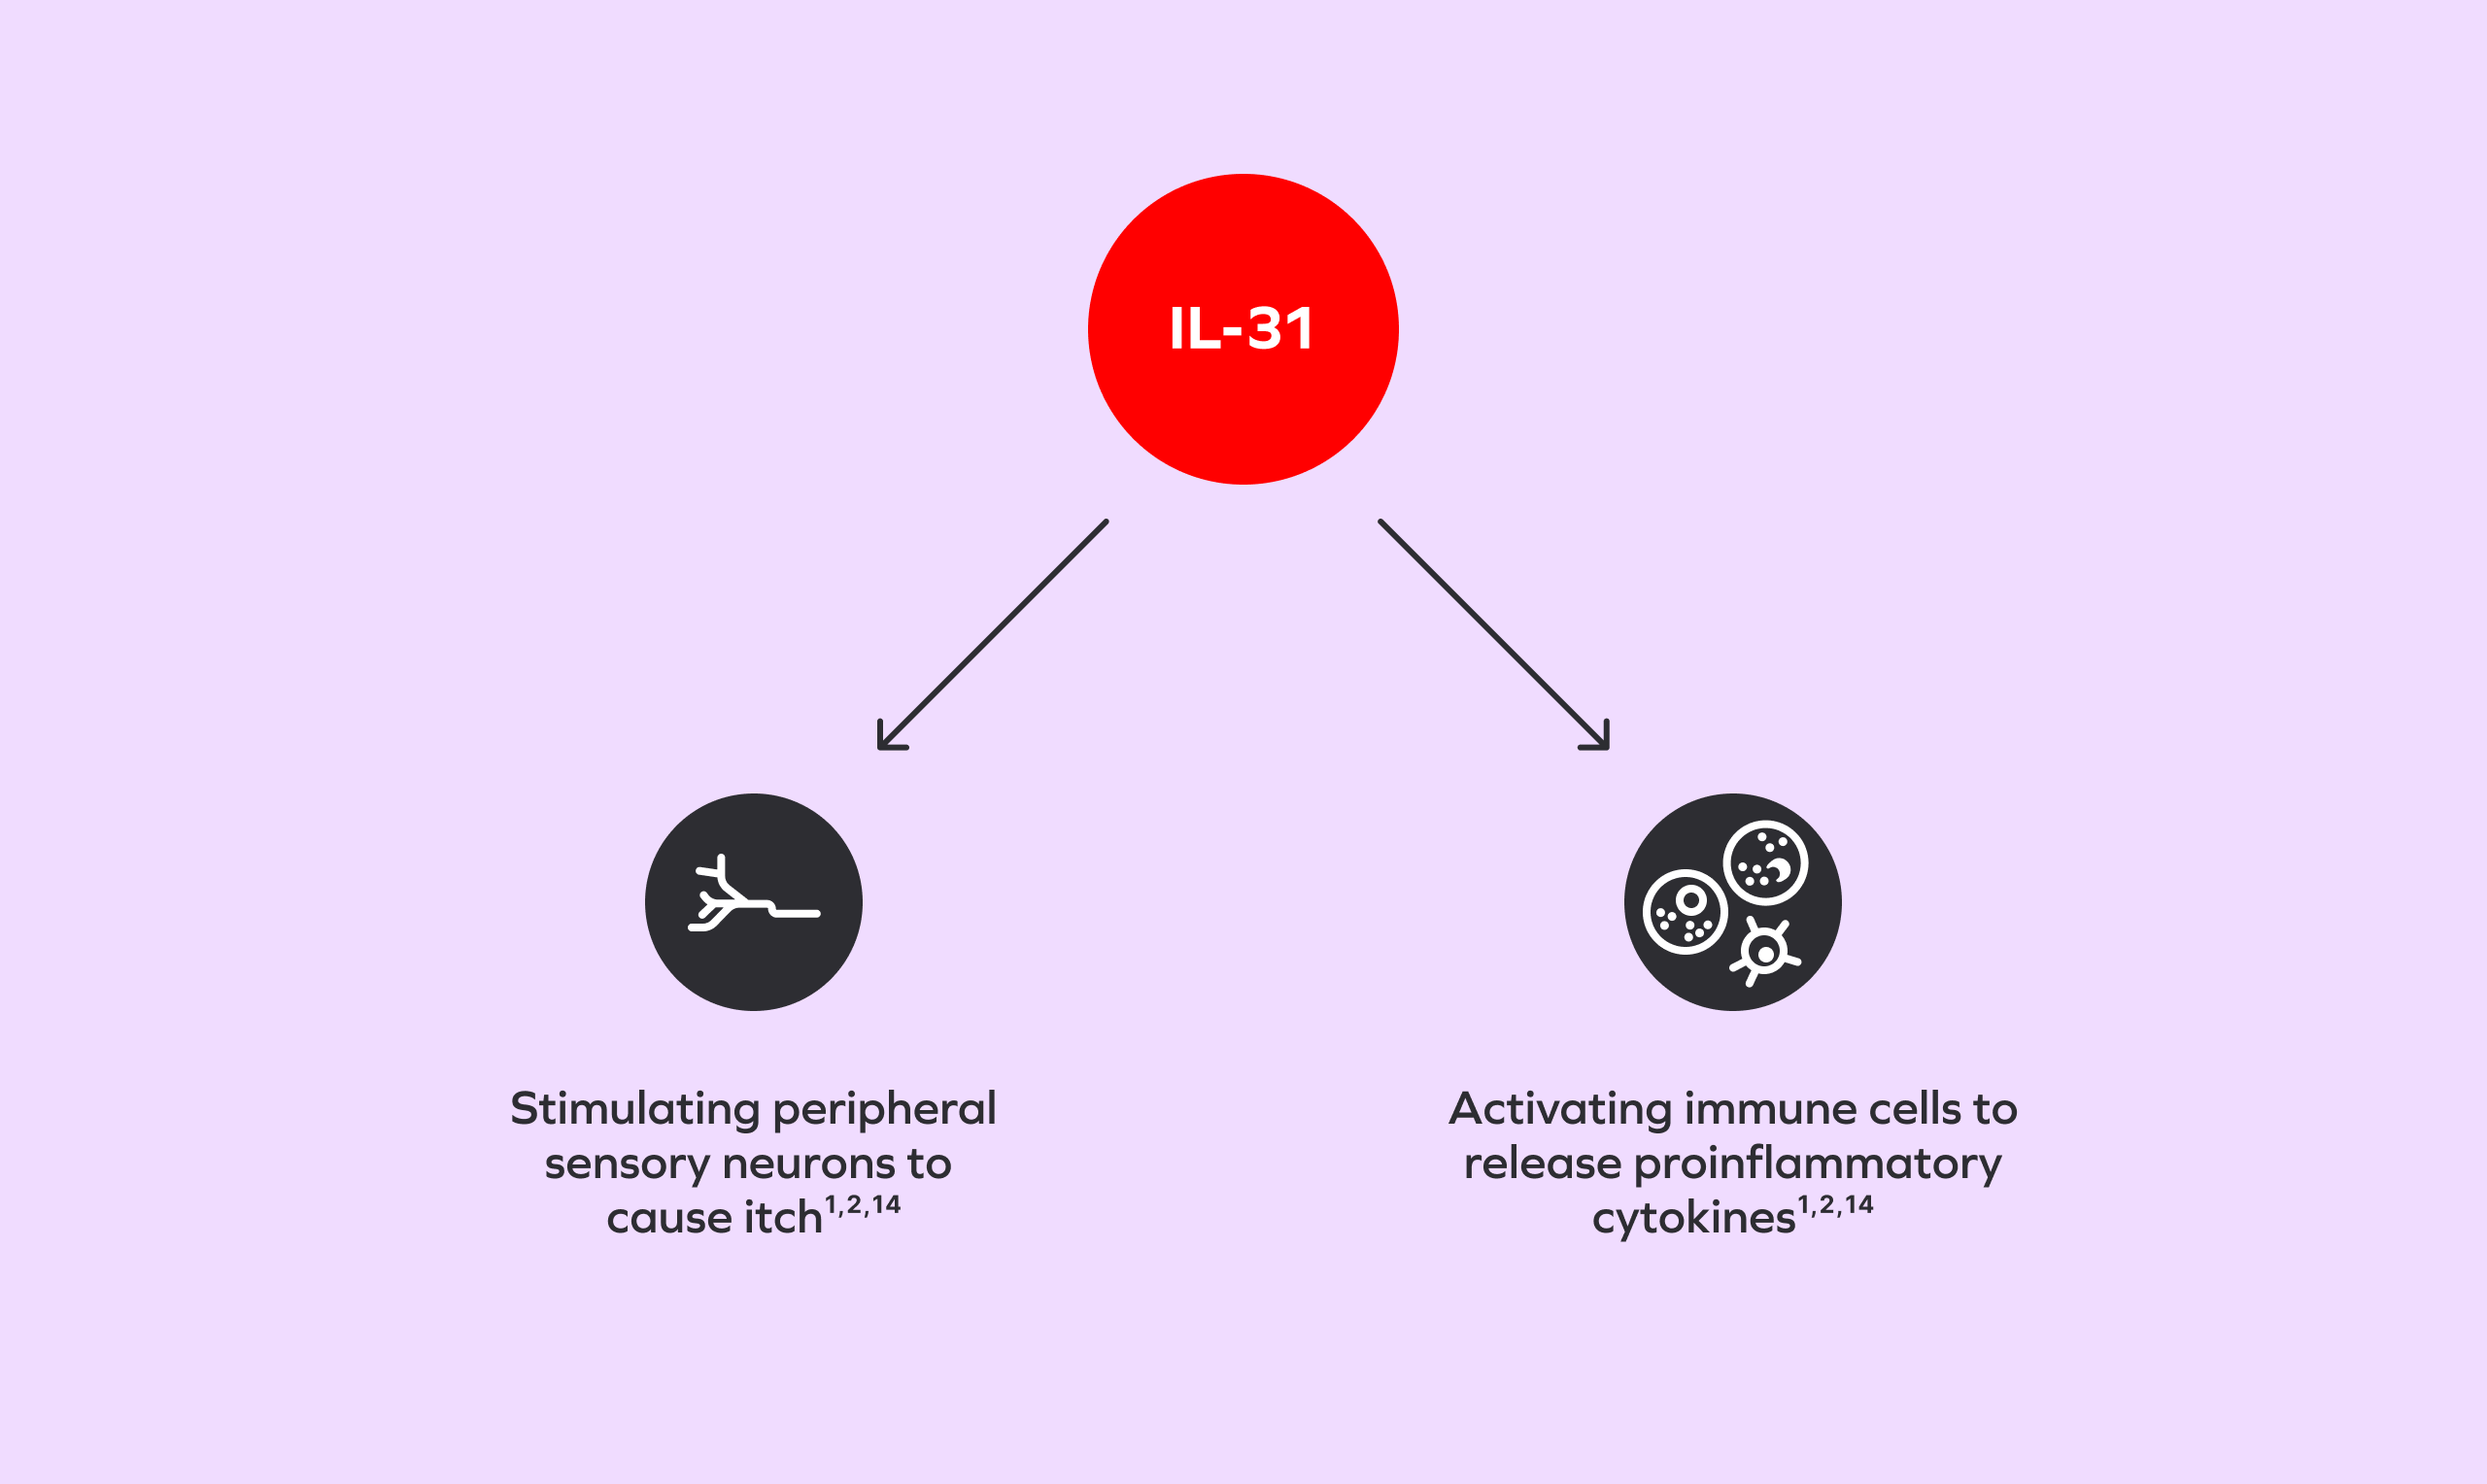 A red circle labeled "IL-31." Two arrows extend from the circle, pointing to 2 more icons below it.